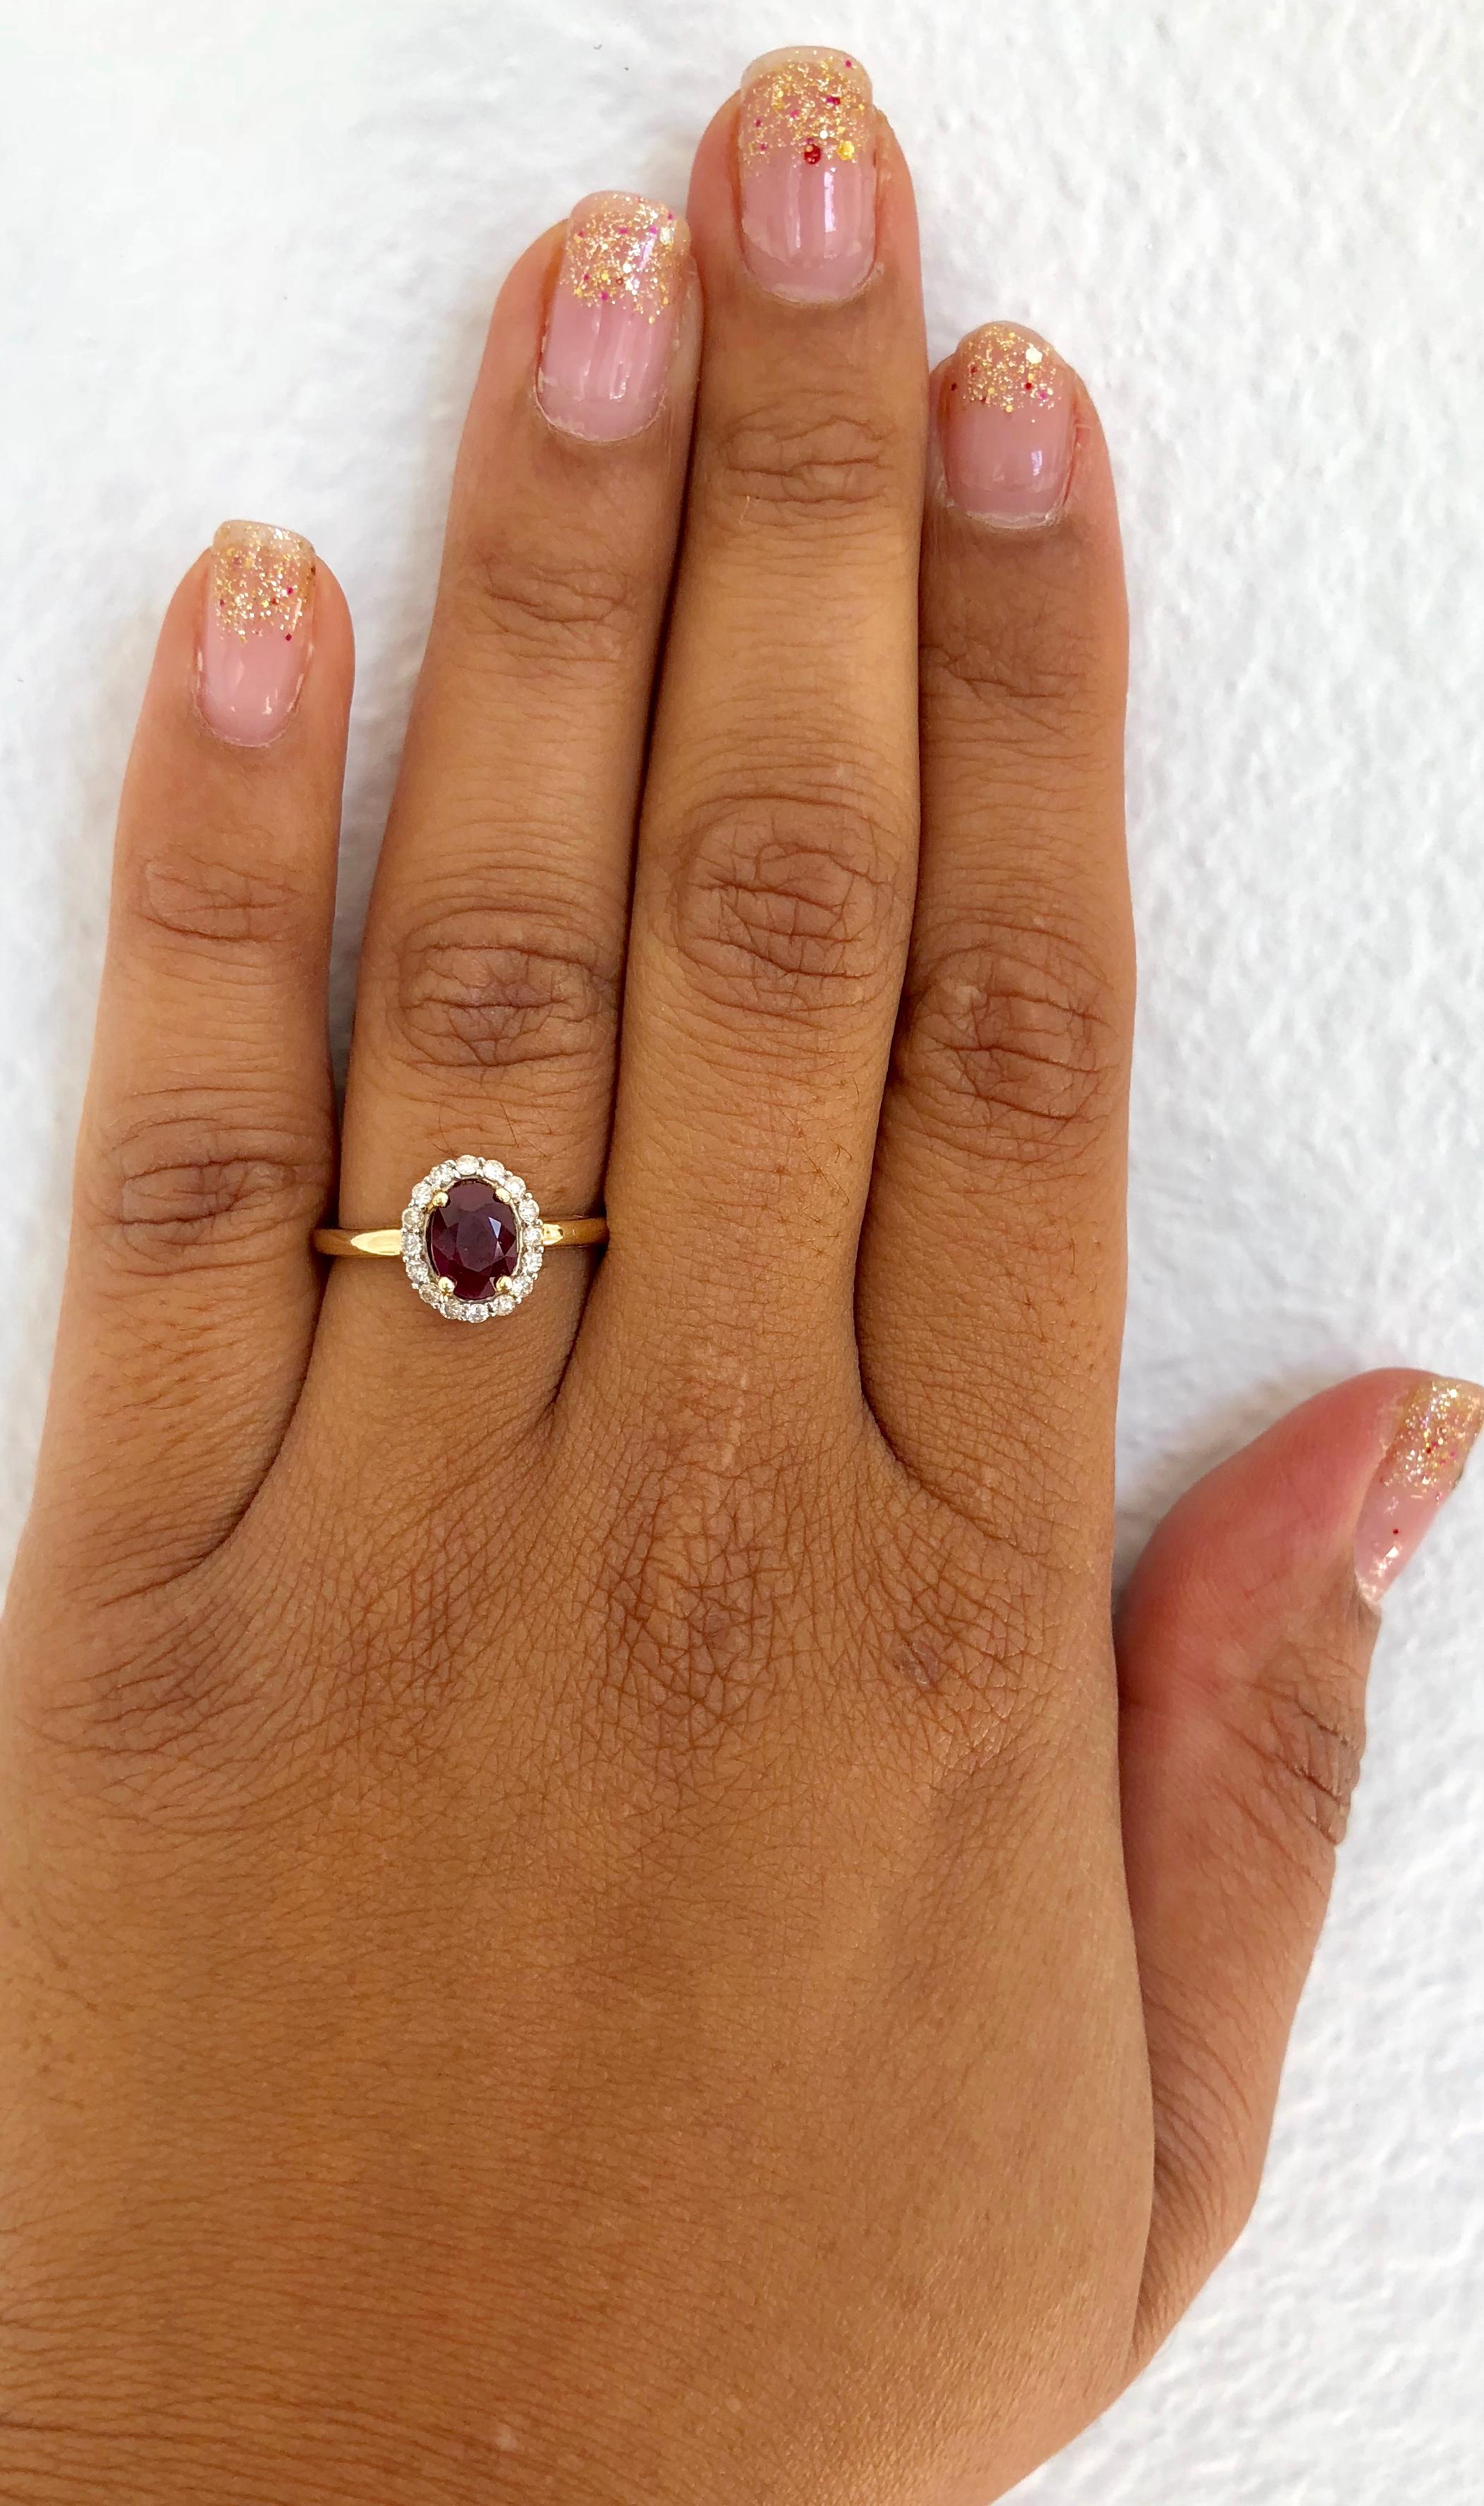 This elegant and dainty Ruby & Diamond Ring can be a modern Engagement/Promise ring. It has a Oval Cut Deep Burgundy Ruby that is 1.15 carats with a halo of 17 Round Cut Diamonds weighing 0.21 carats. The total carat weight of the ring is 1.36